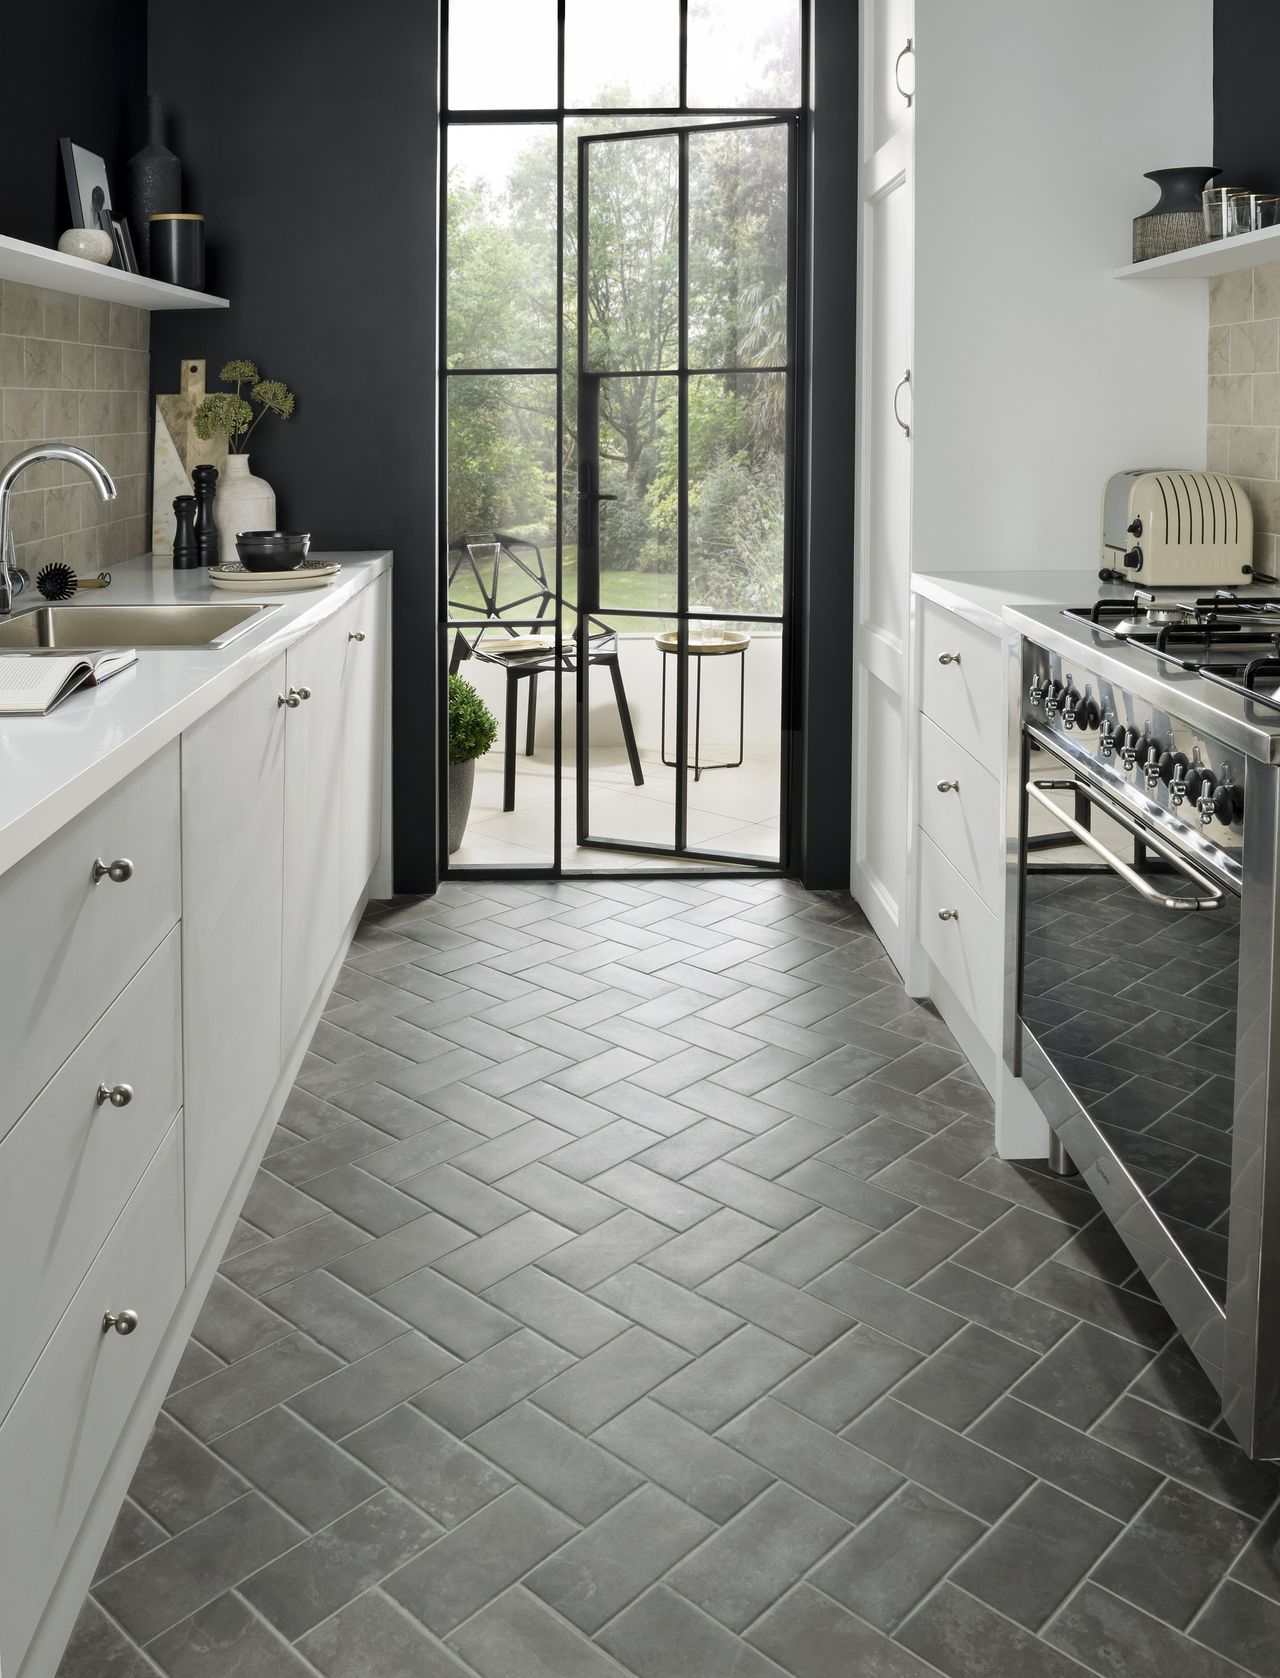 16 small kitchen tile ideas styles, tips and hacks to make your space look bigger Real Homes